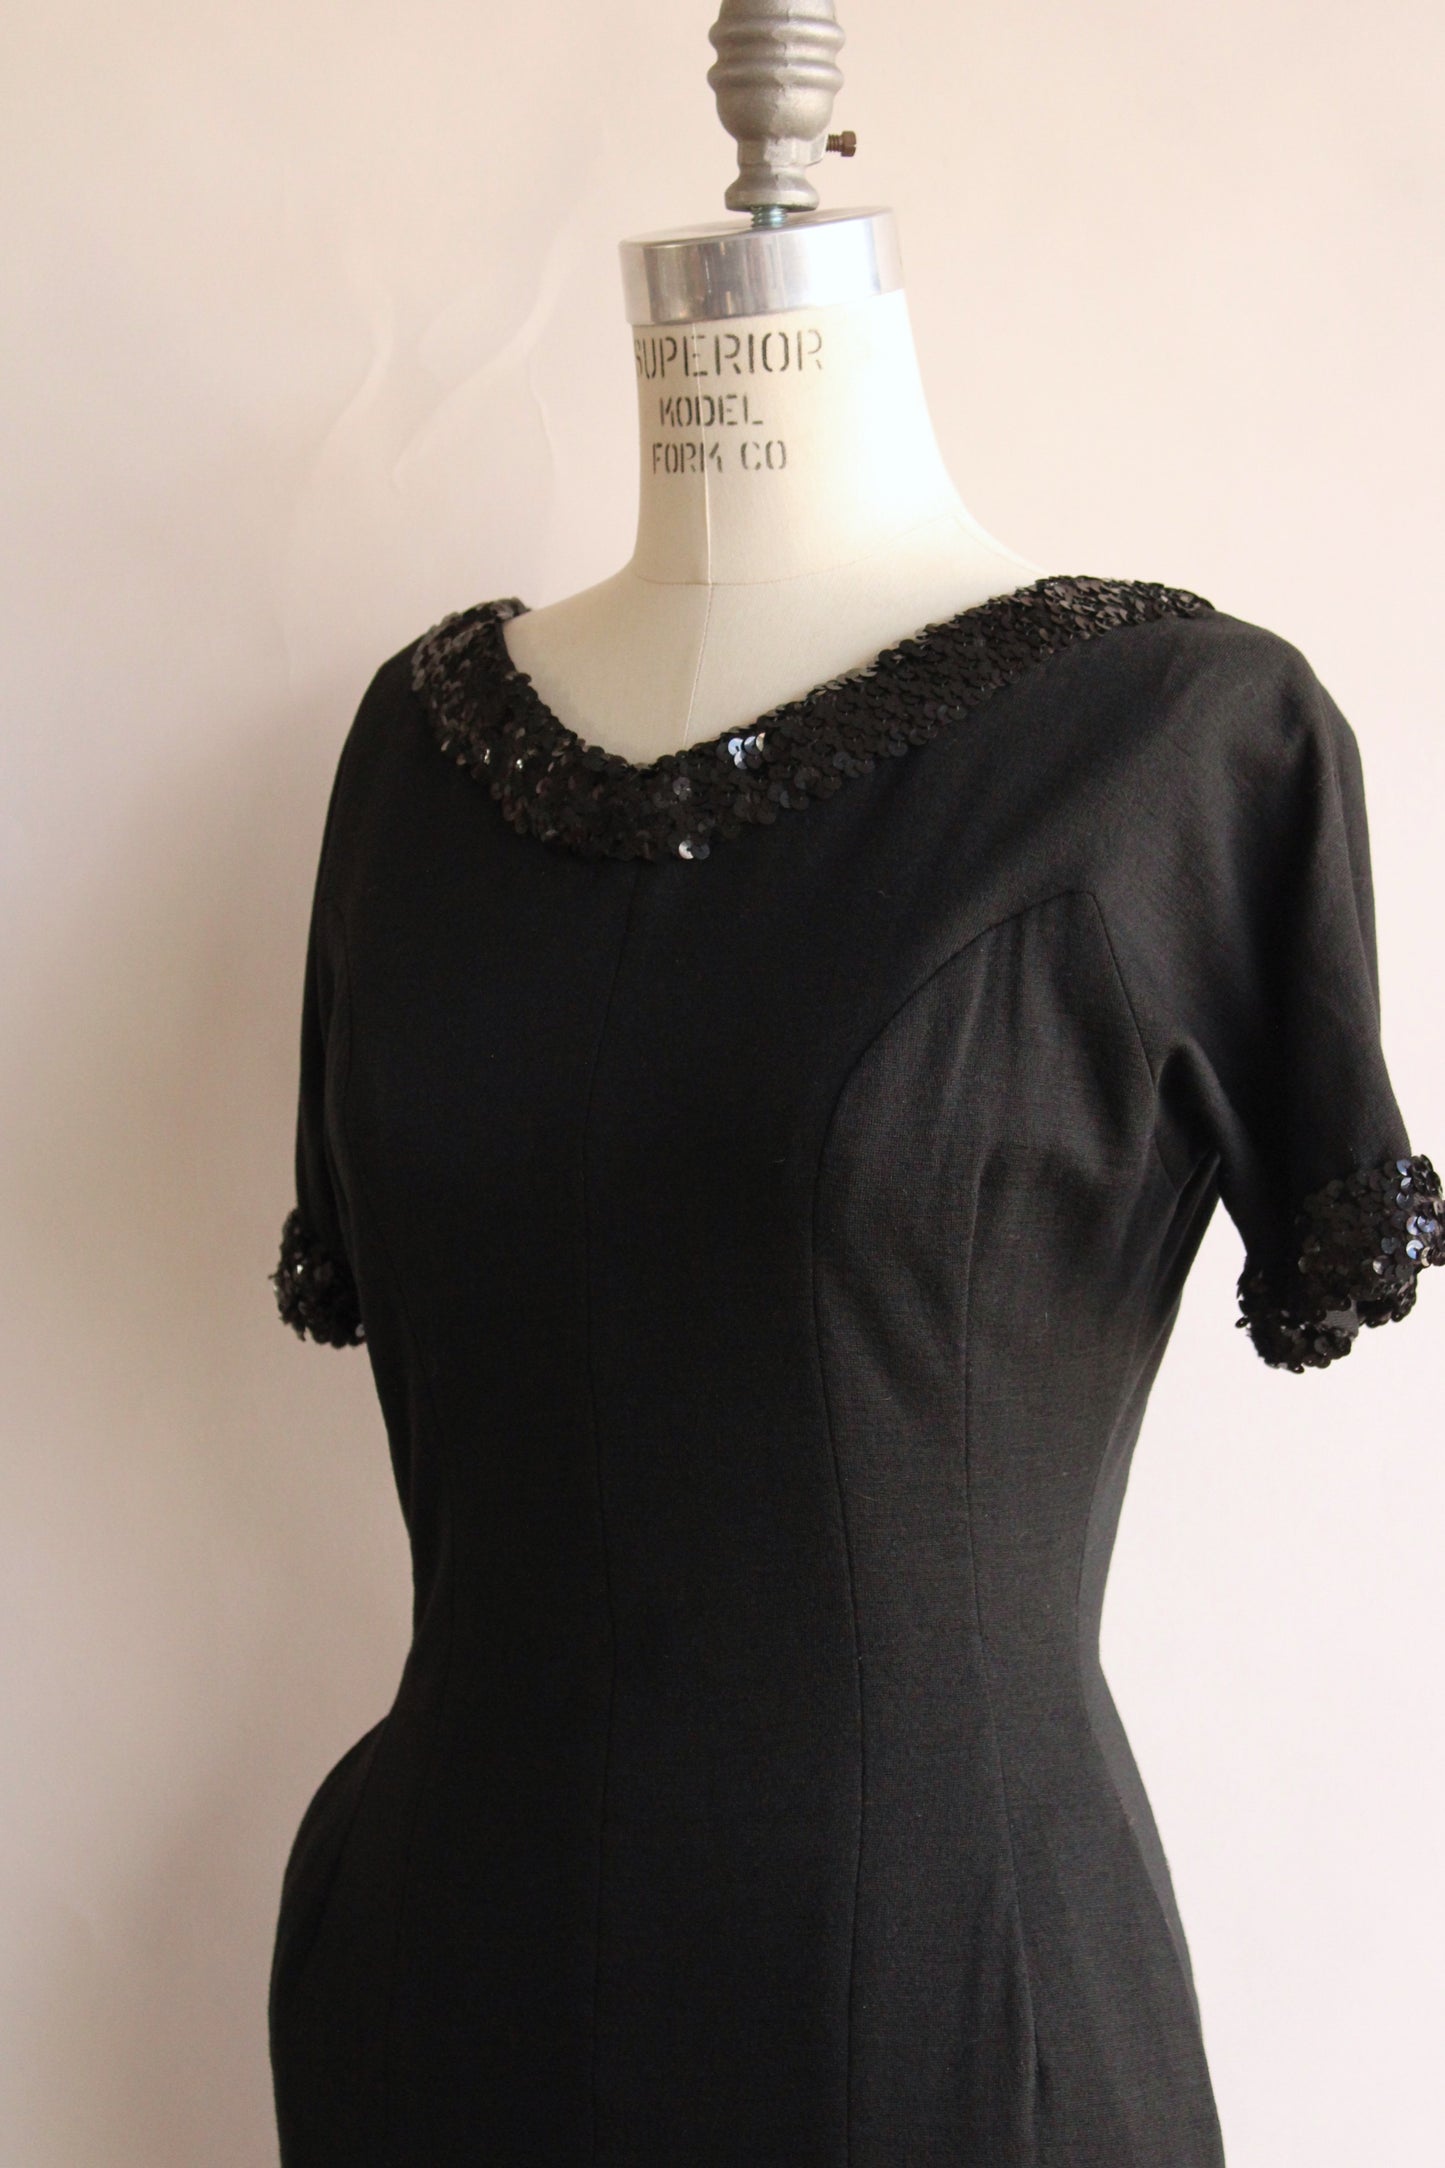 Vintage 1950s 1960s Black Wiggle Dress with Pockets and Sequin Trim